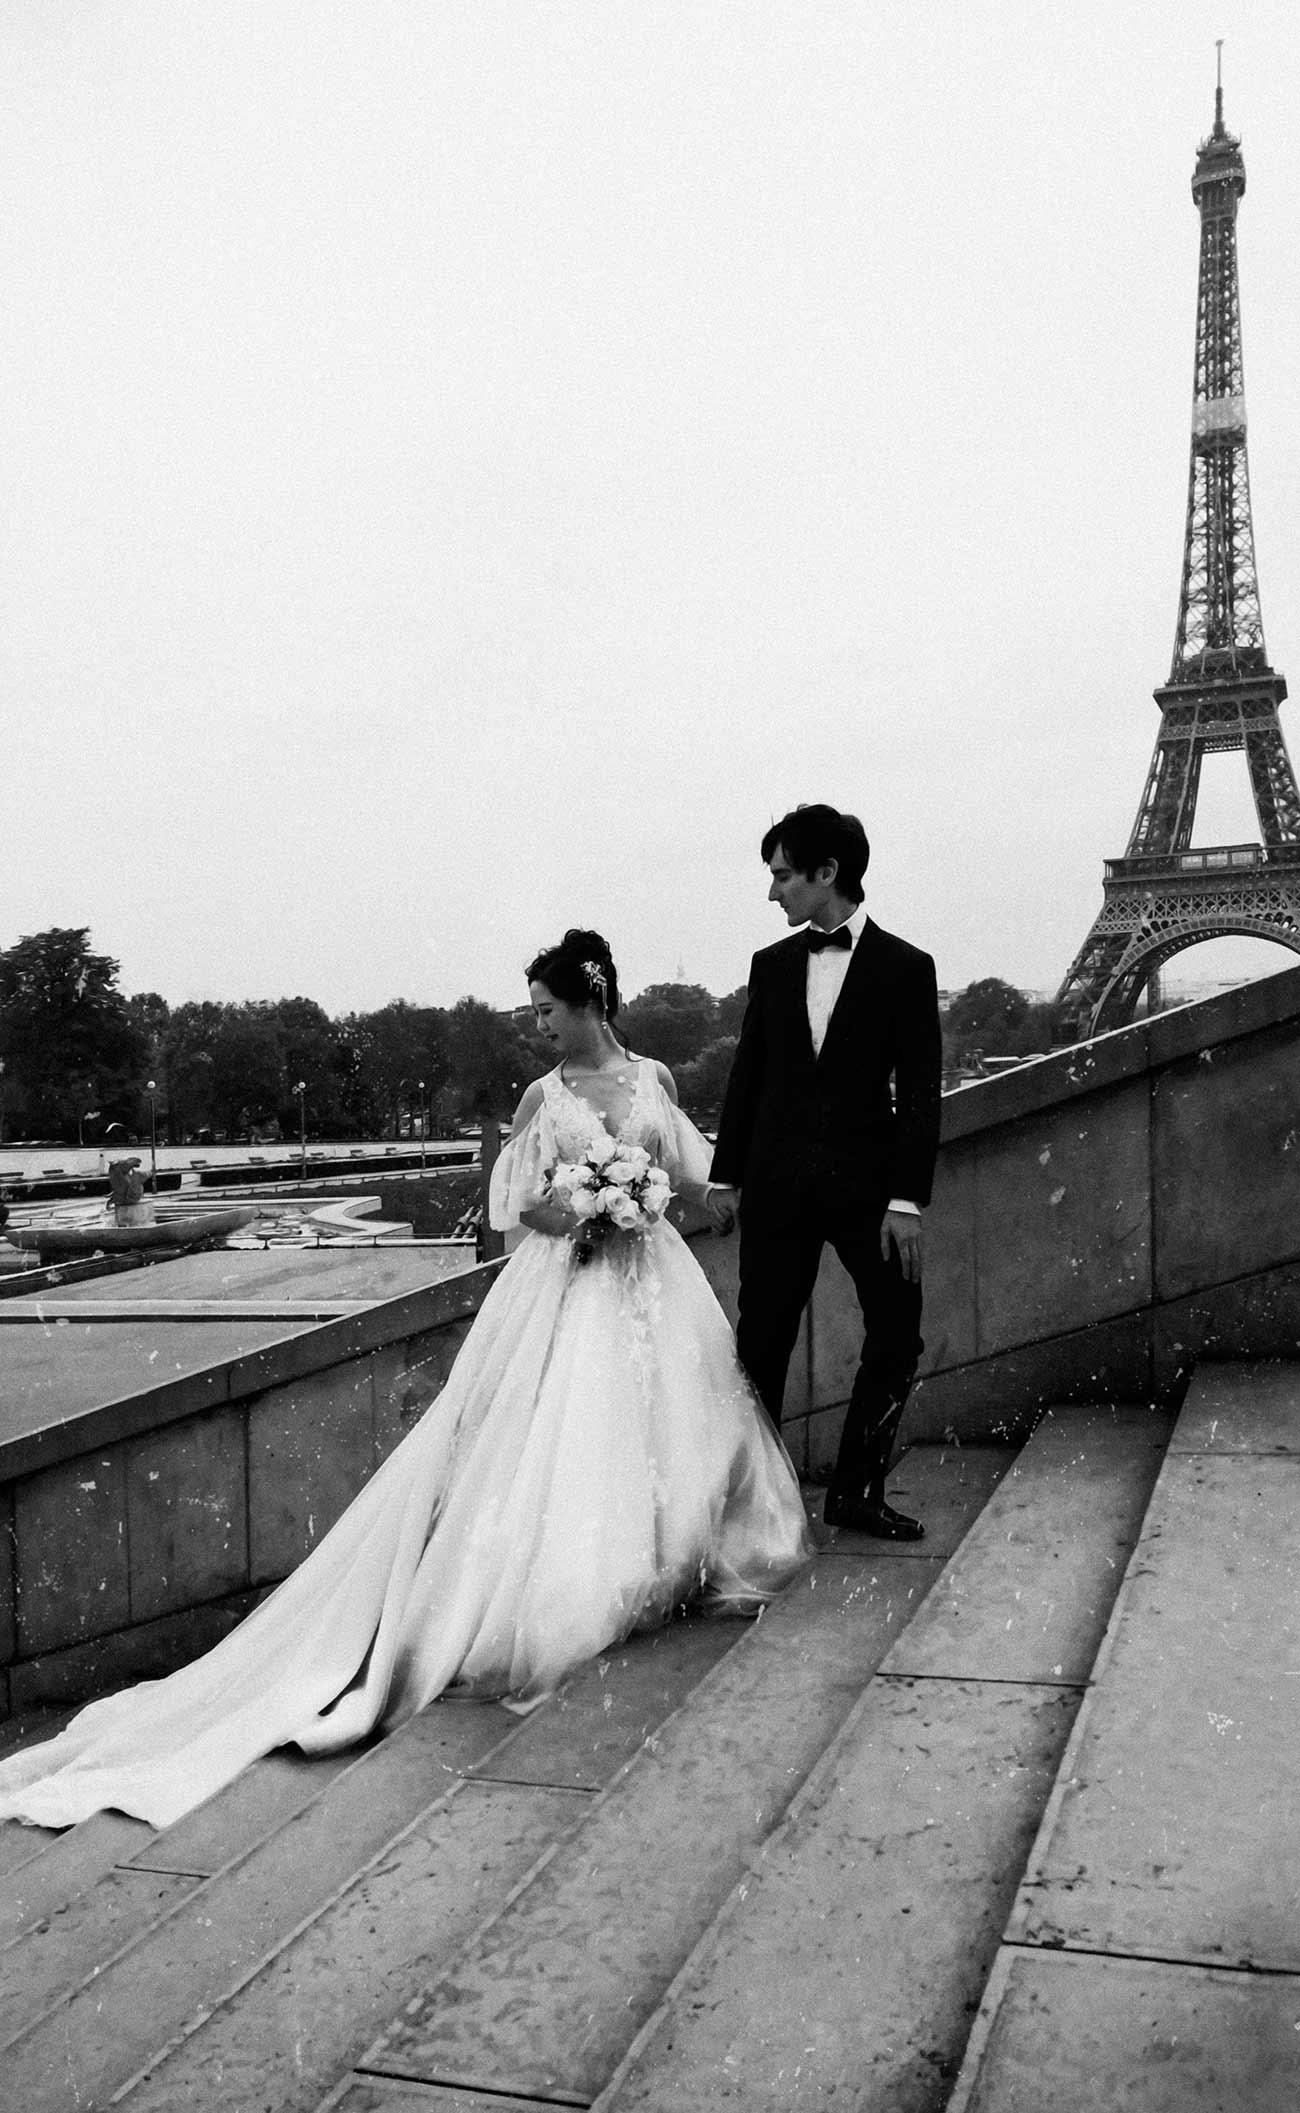 A man and woman standing on steps near the eiffel tower.